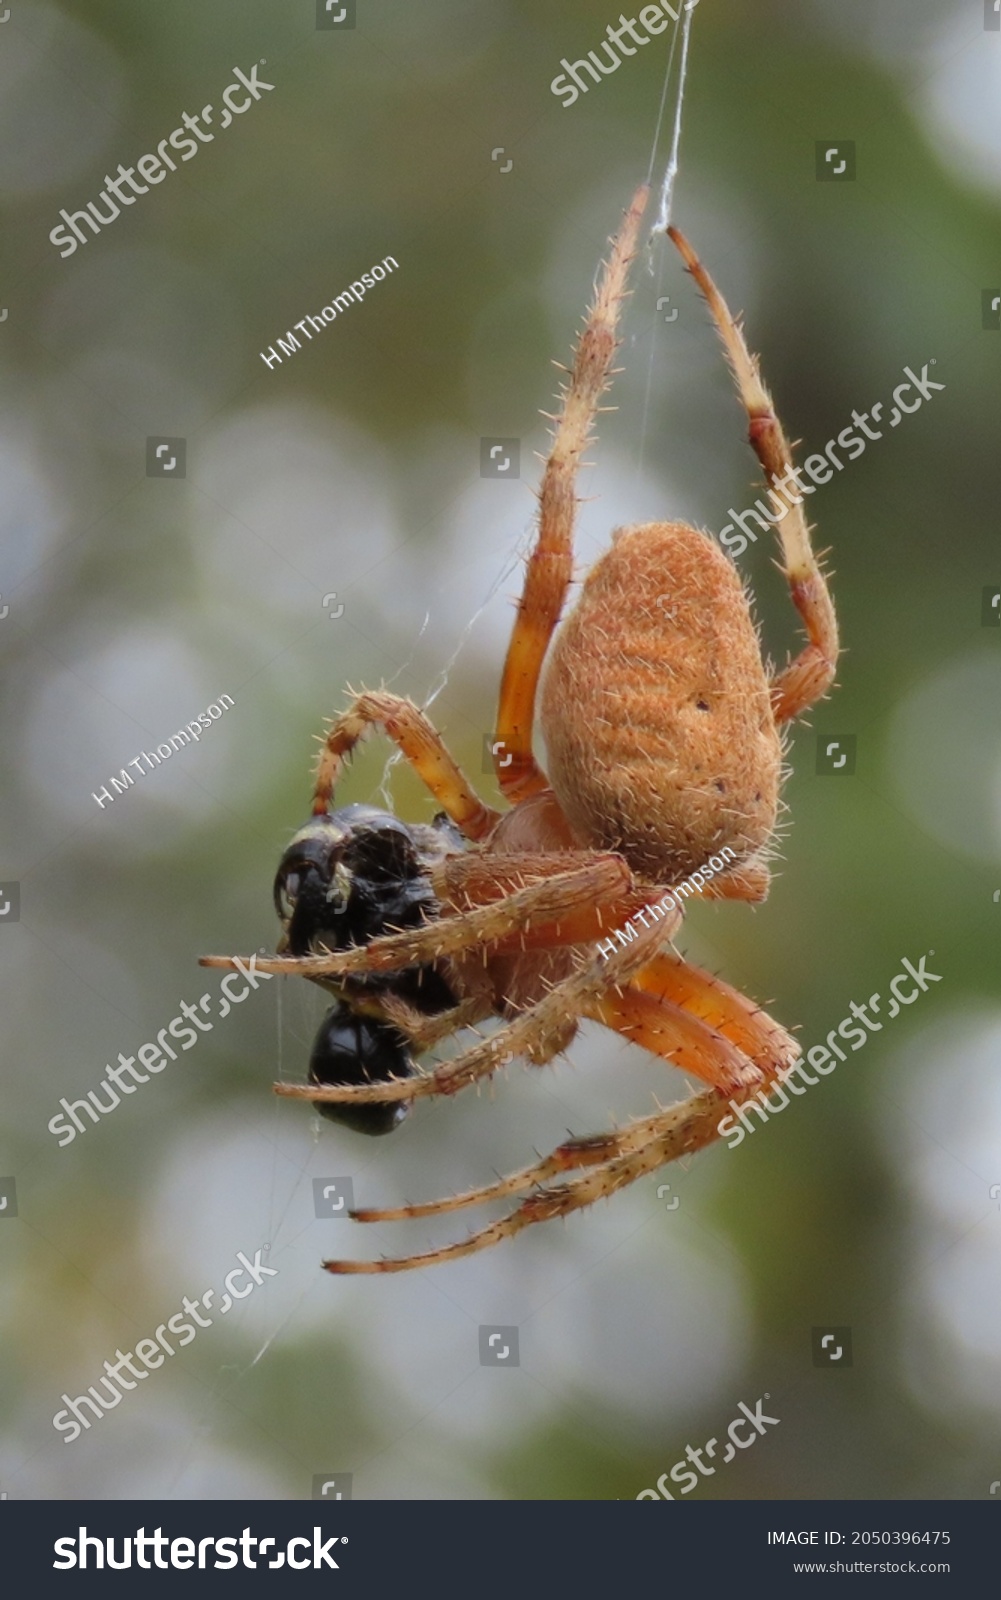 Close-up photo of bristly and corpulent, albeit orange and attractive, Spotted Orb Weaver spider (Neoscona crucifera) plying its trade by sucking on its most recent victim in its web. #2050396475